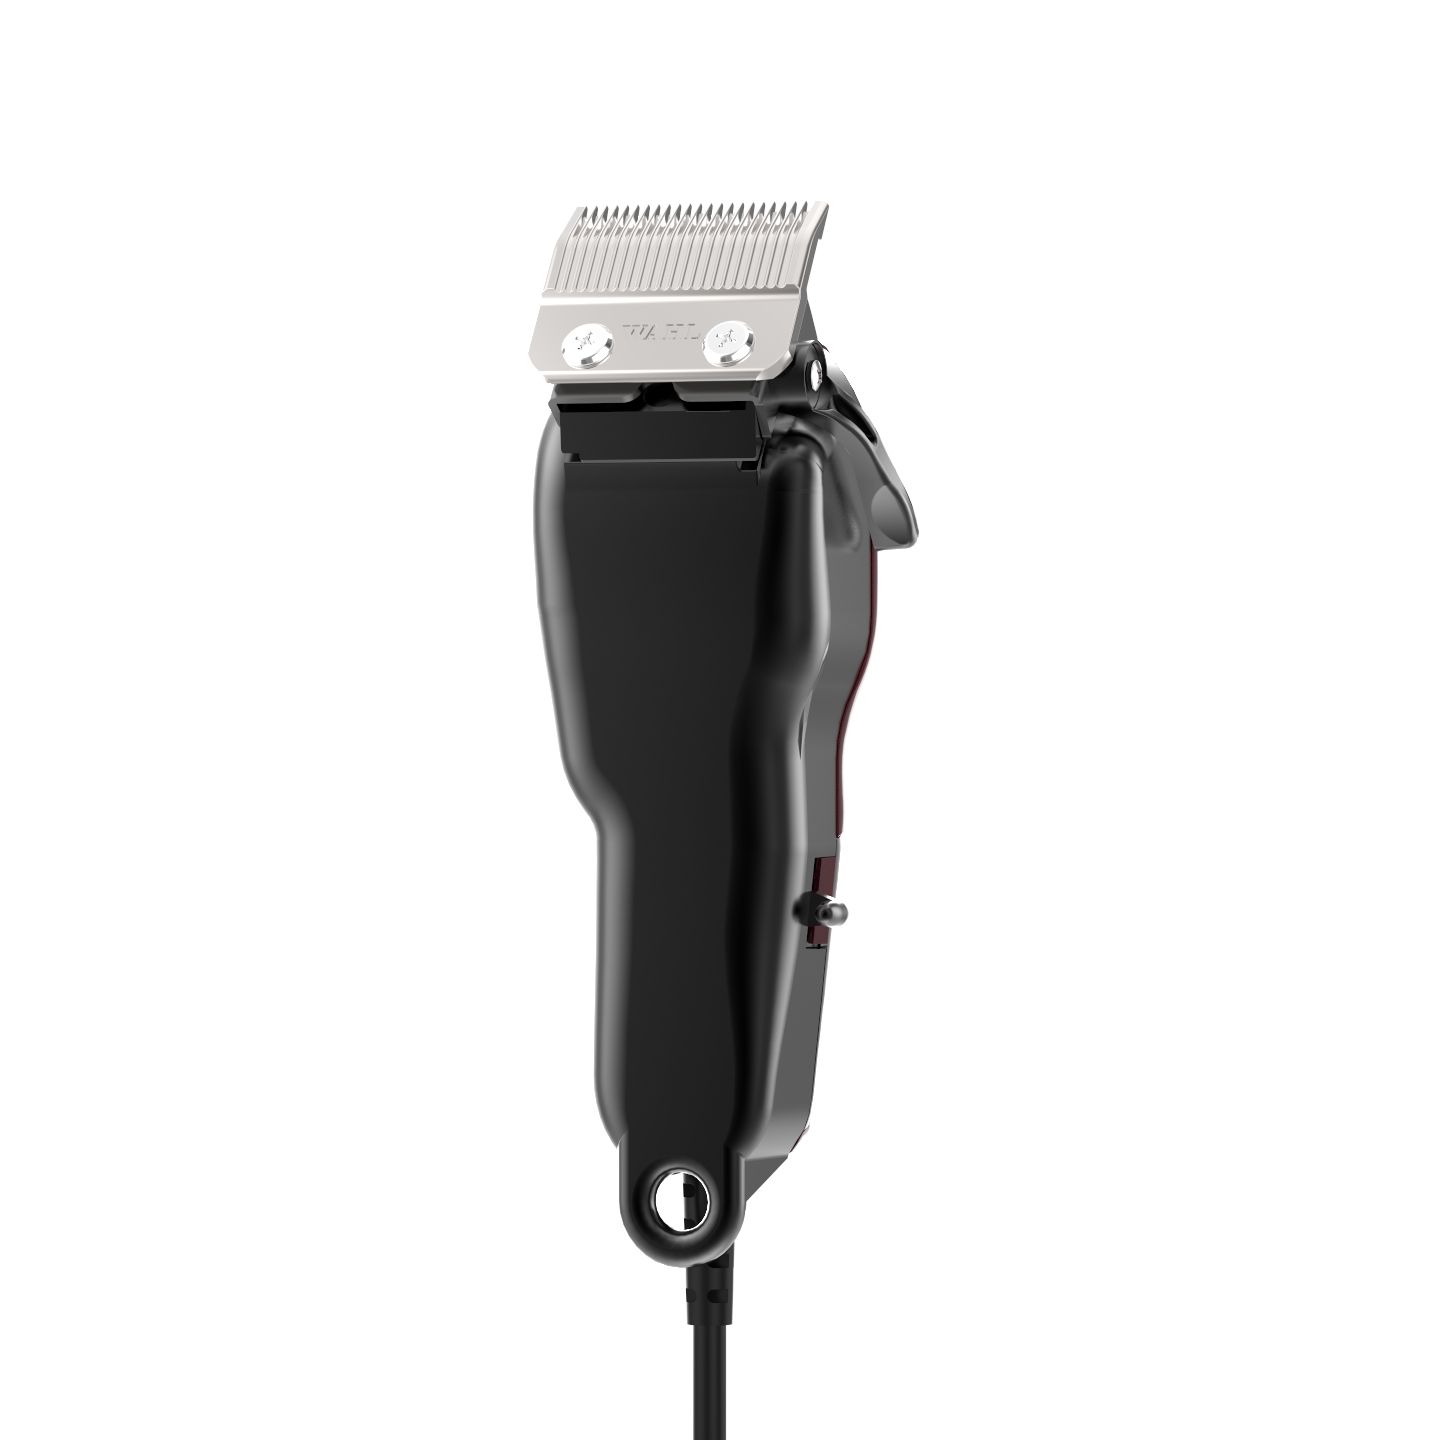 Wahl Magic Clip Corded Professional Hair Clipper 5 Star Series UK